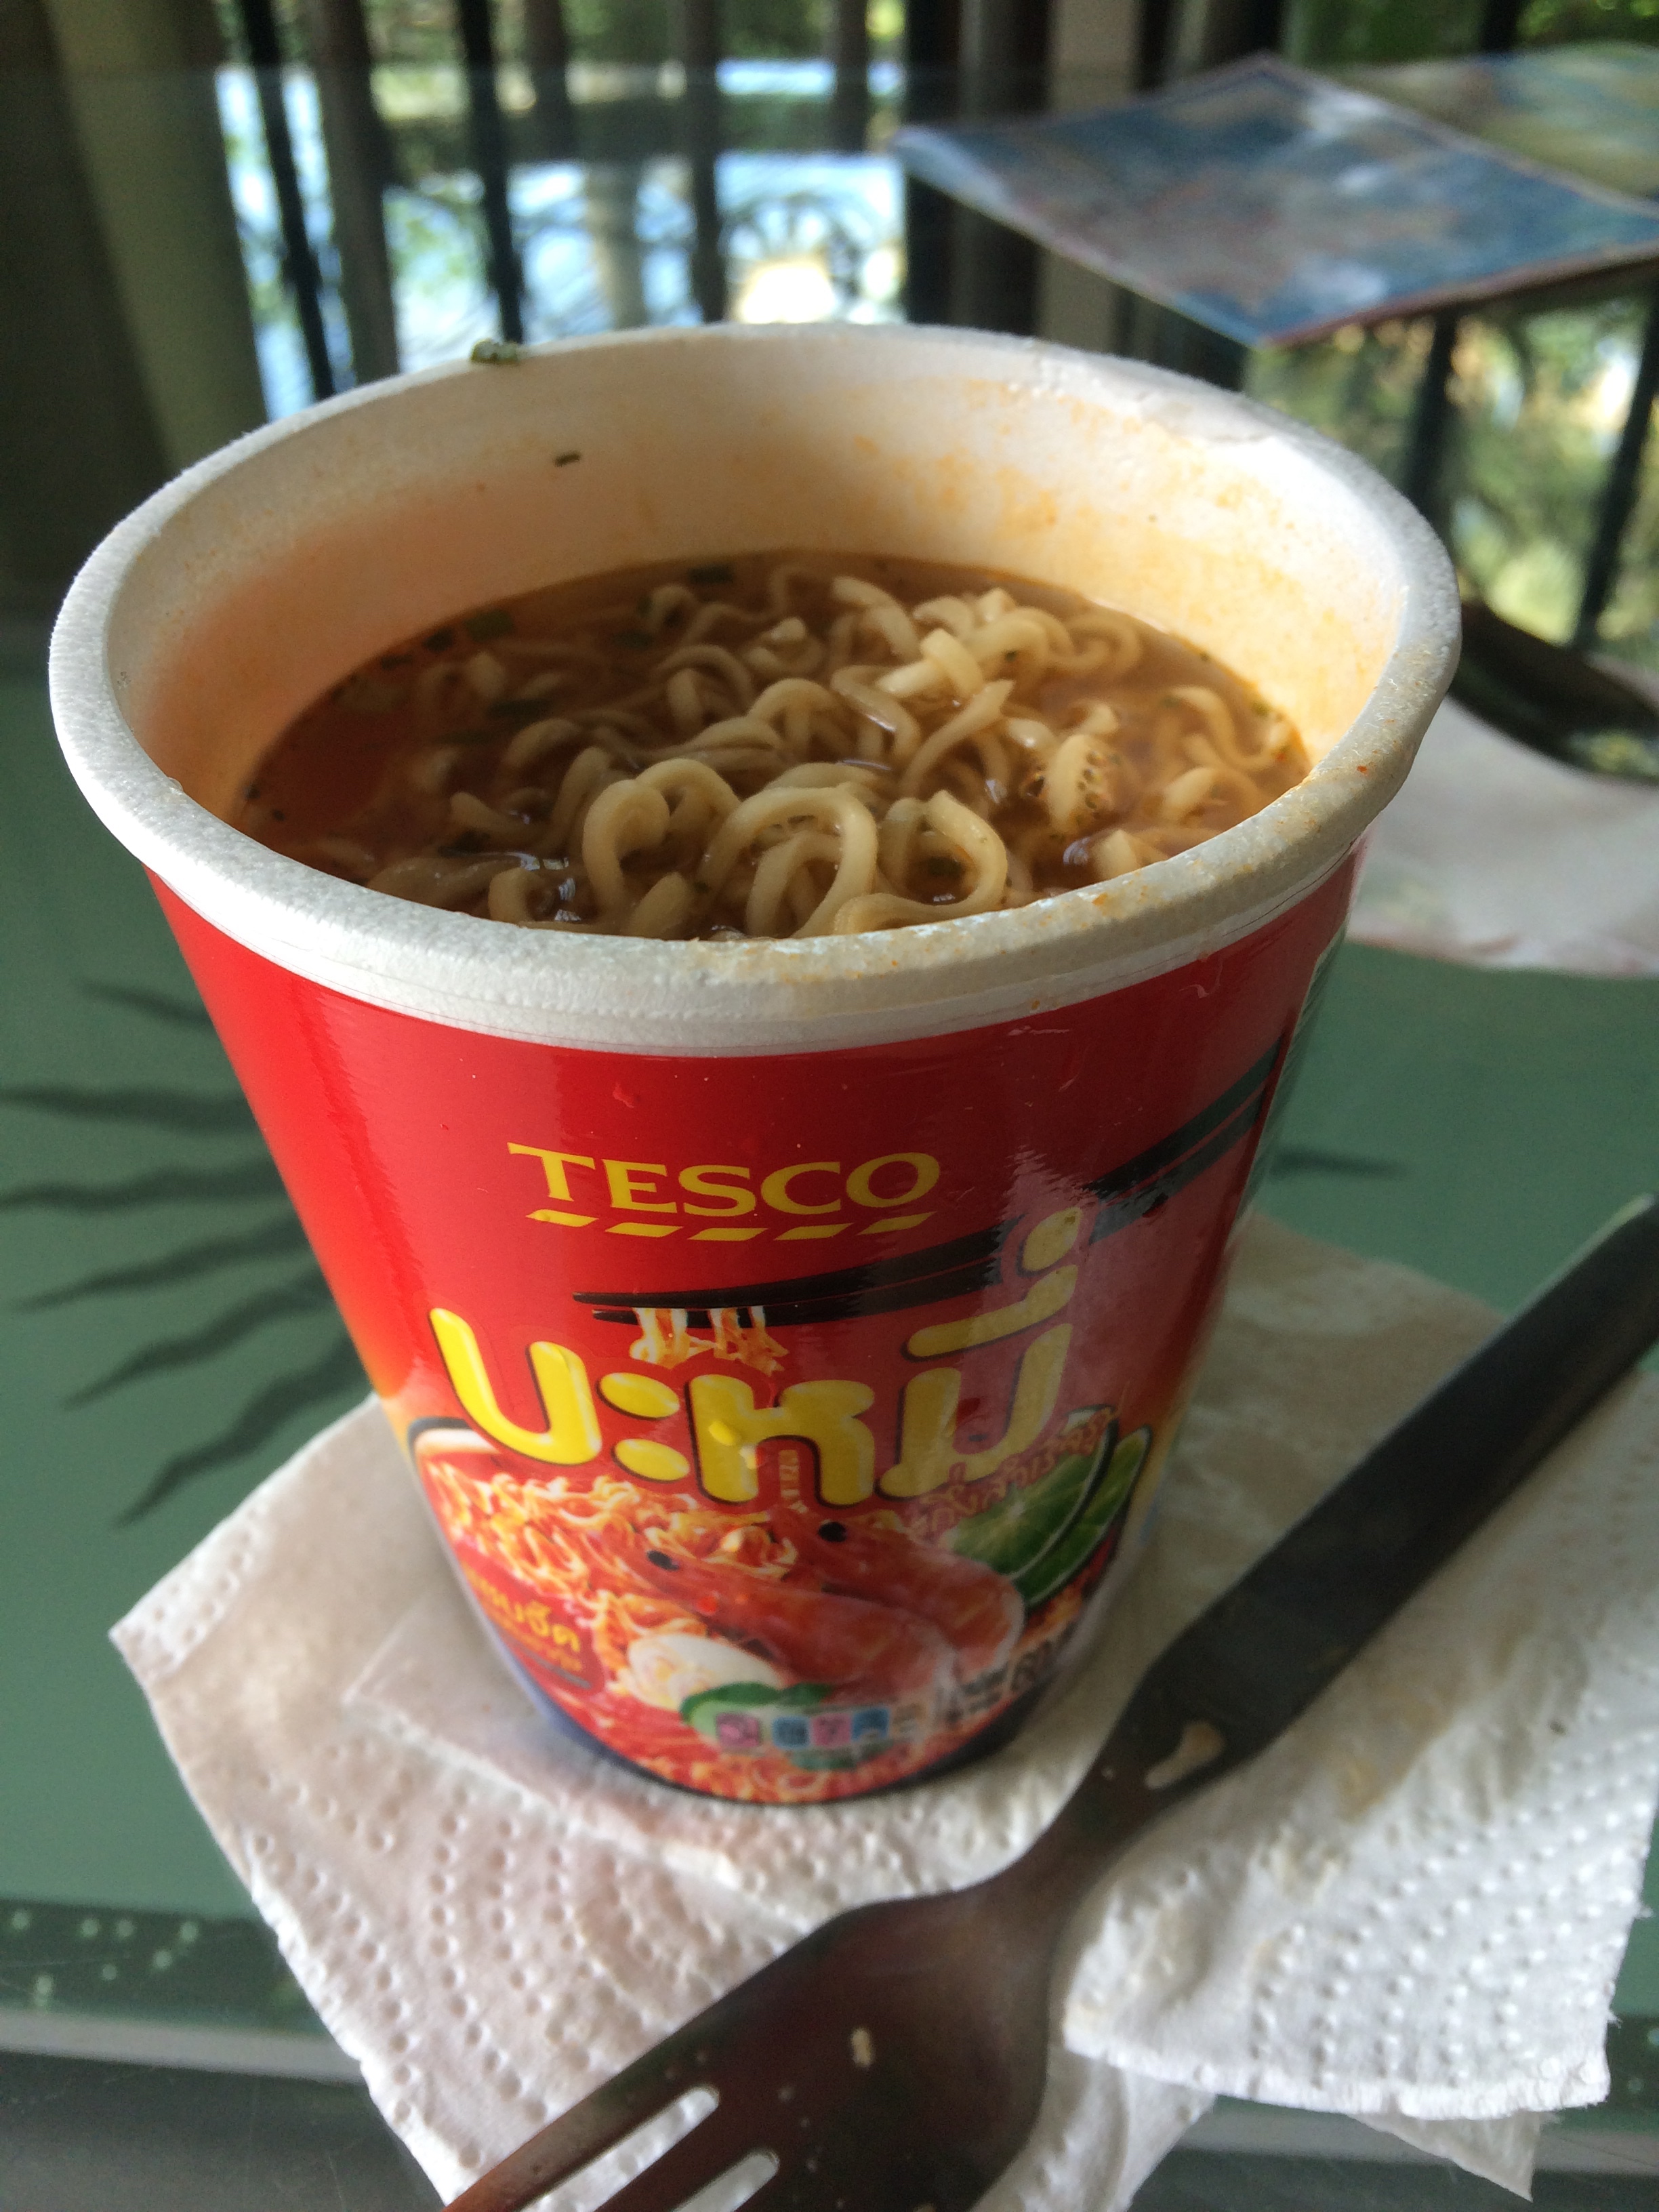 Most days my lunch is Thai ramen noodles. So spicy and so so good! 